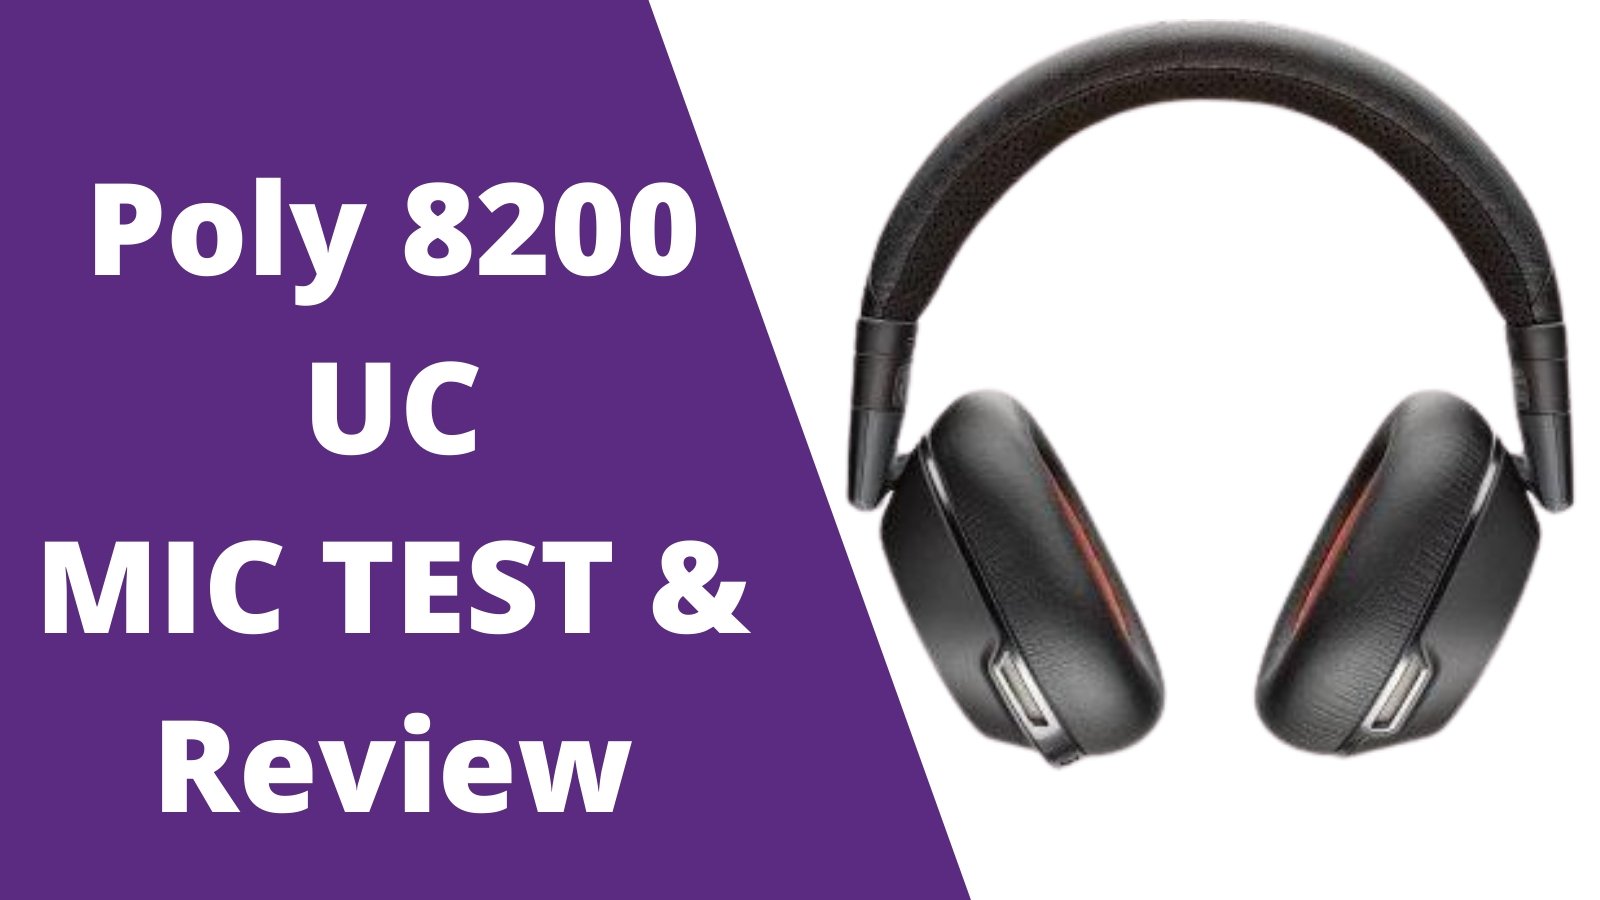 Oh jee Ontevreden seksueel MIC TEST & Review of Poly 8200 UC Bluetooth Wireless Headset - Noise C